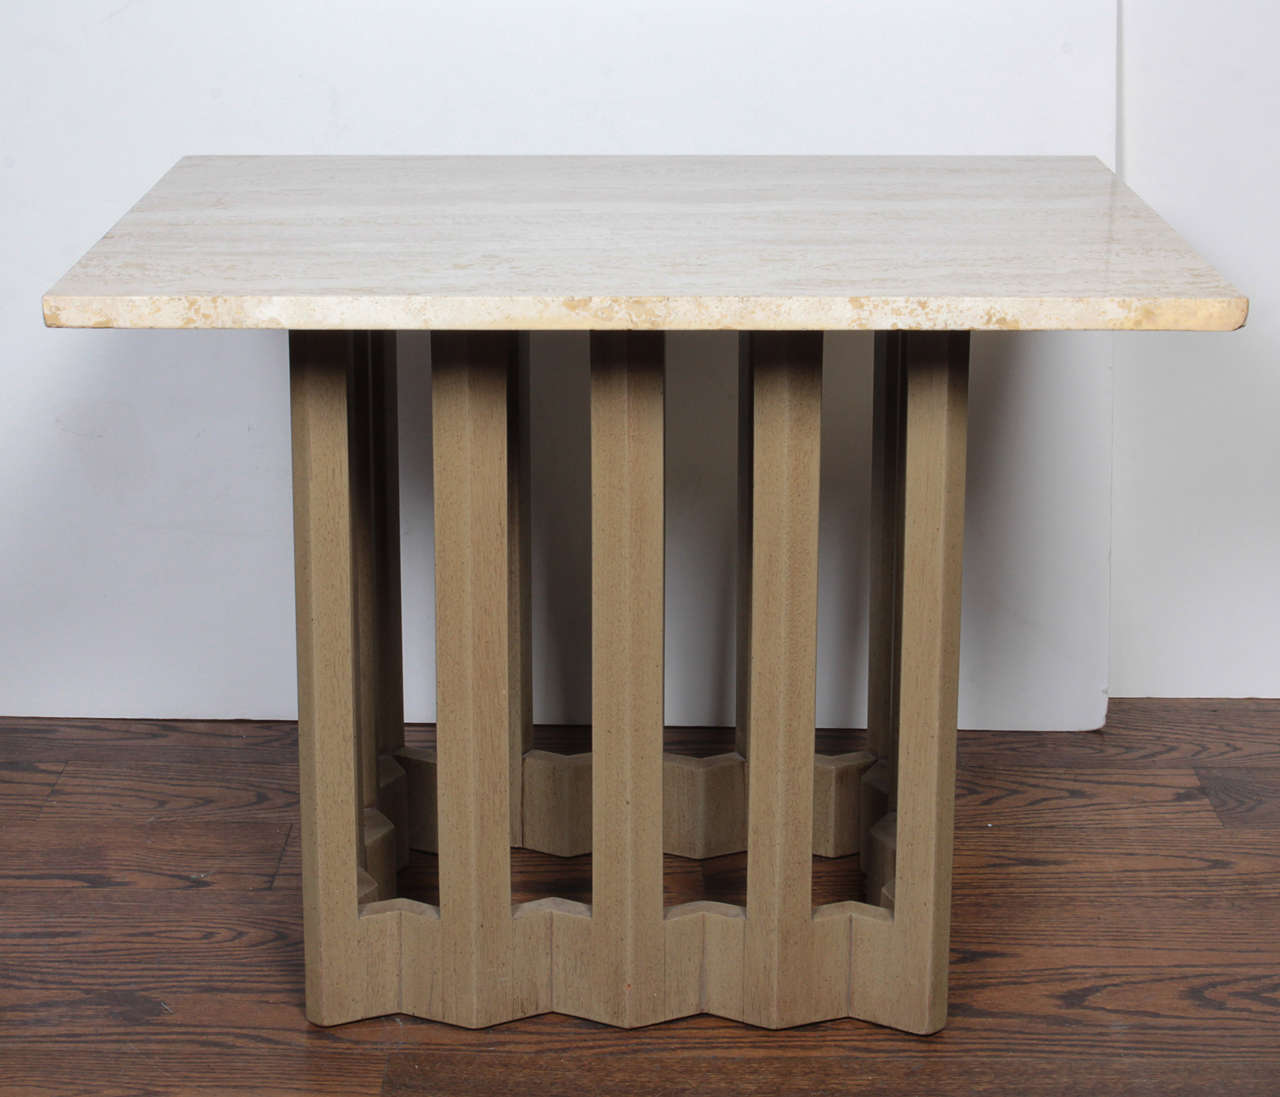 An unusual wood and travertine marble side table by Harvey Probber.